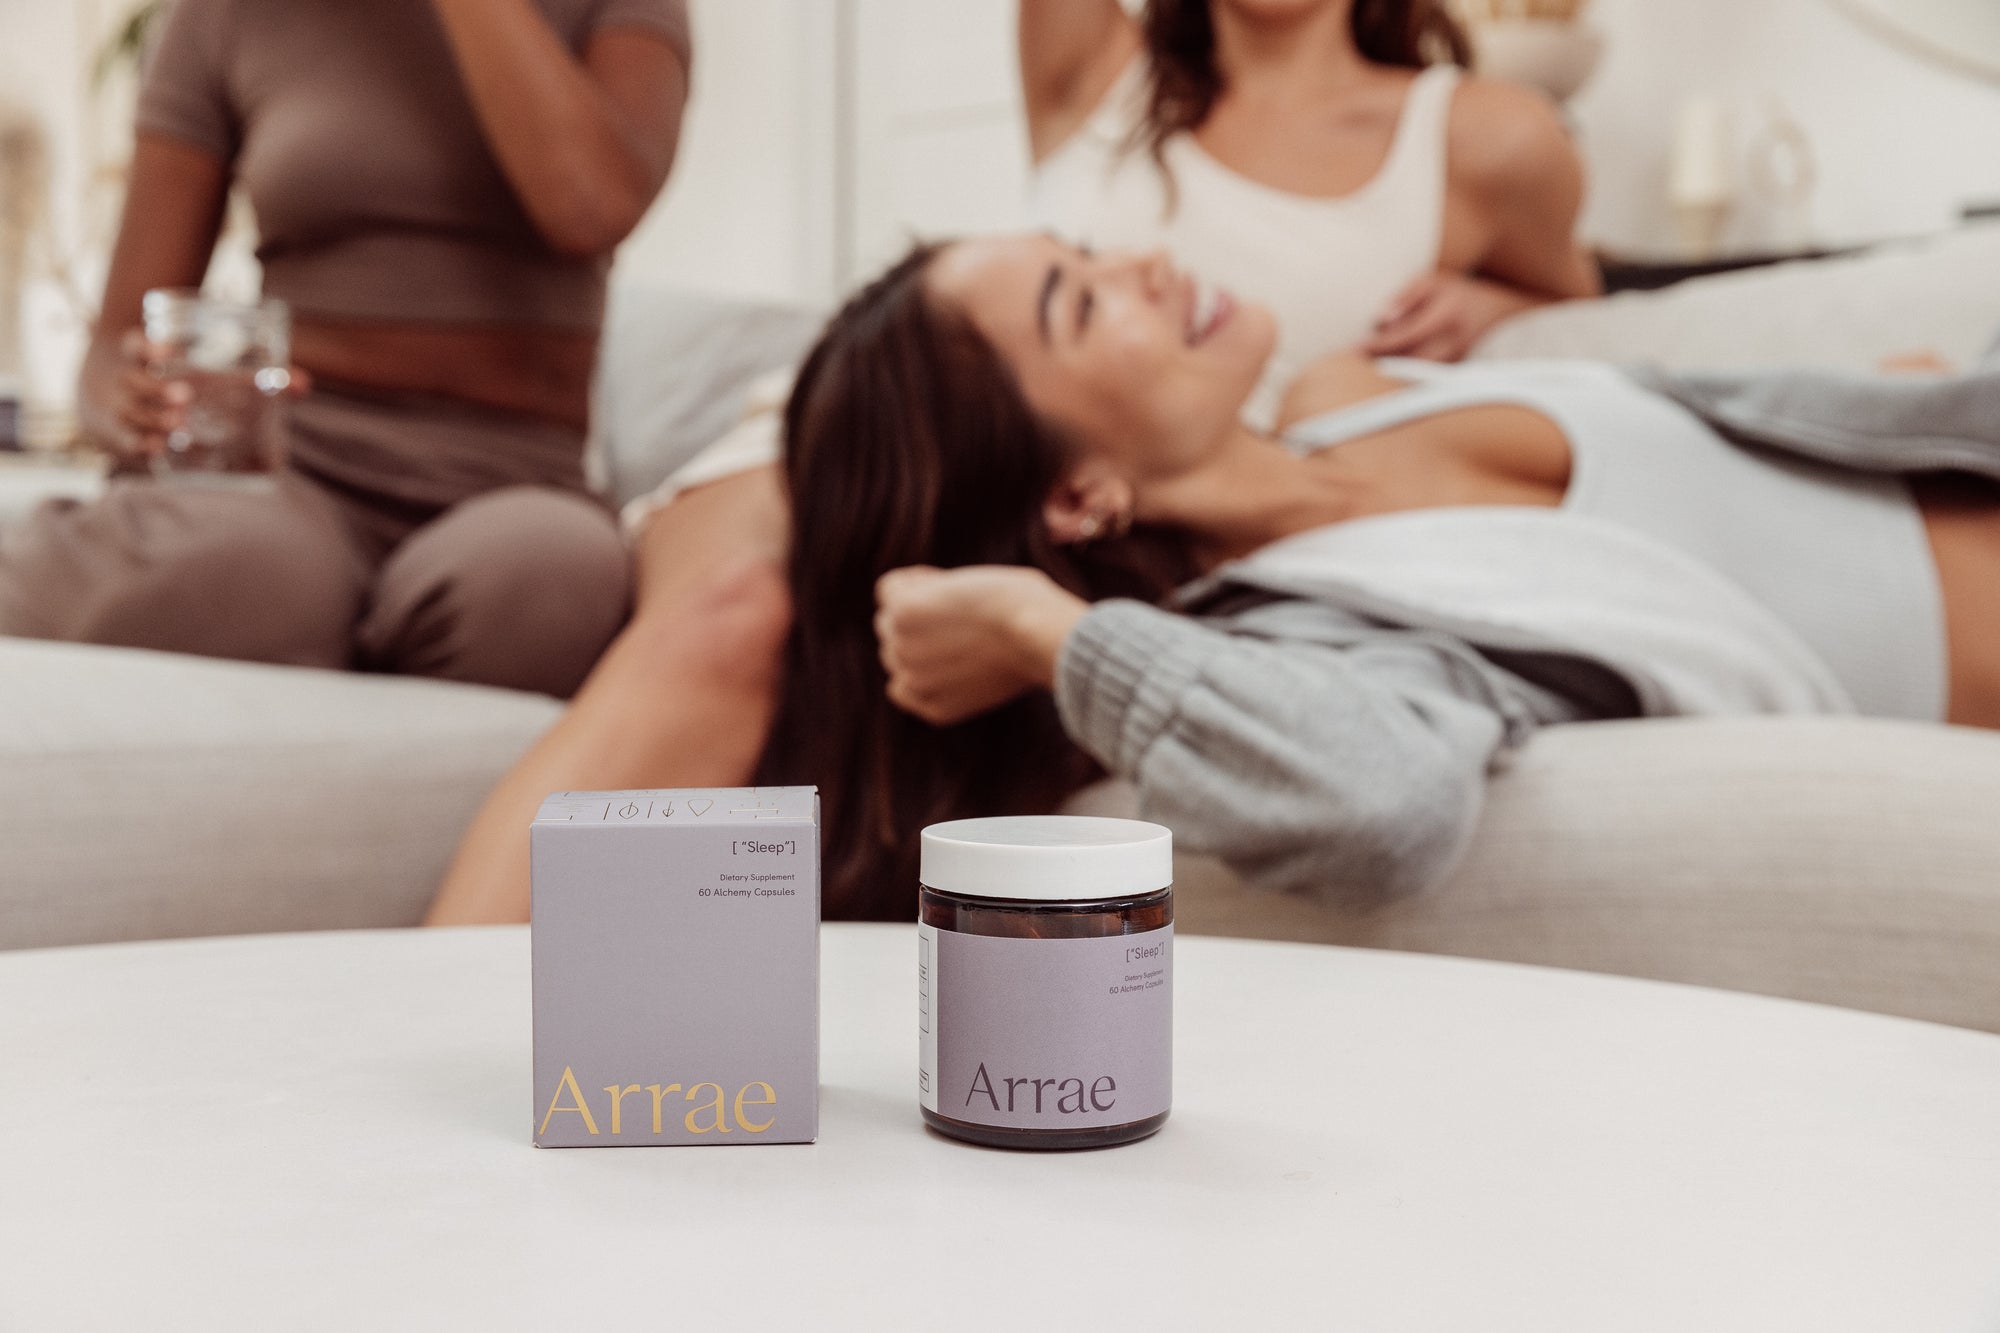 What Makes Sleep by Arrae So Effective?